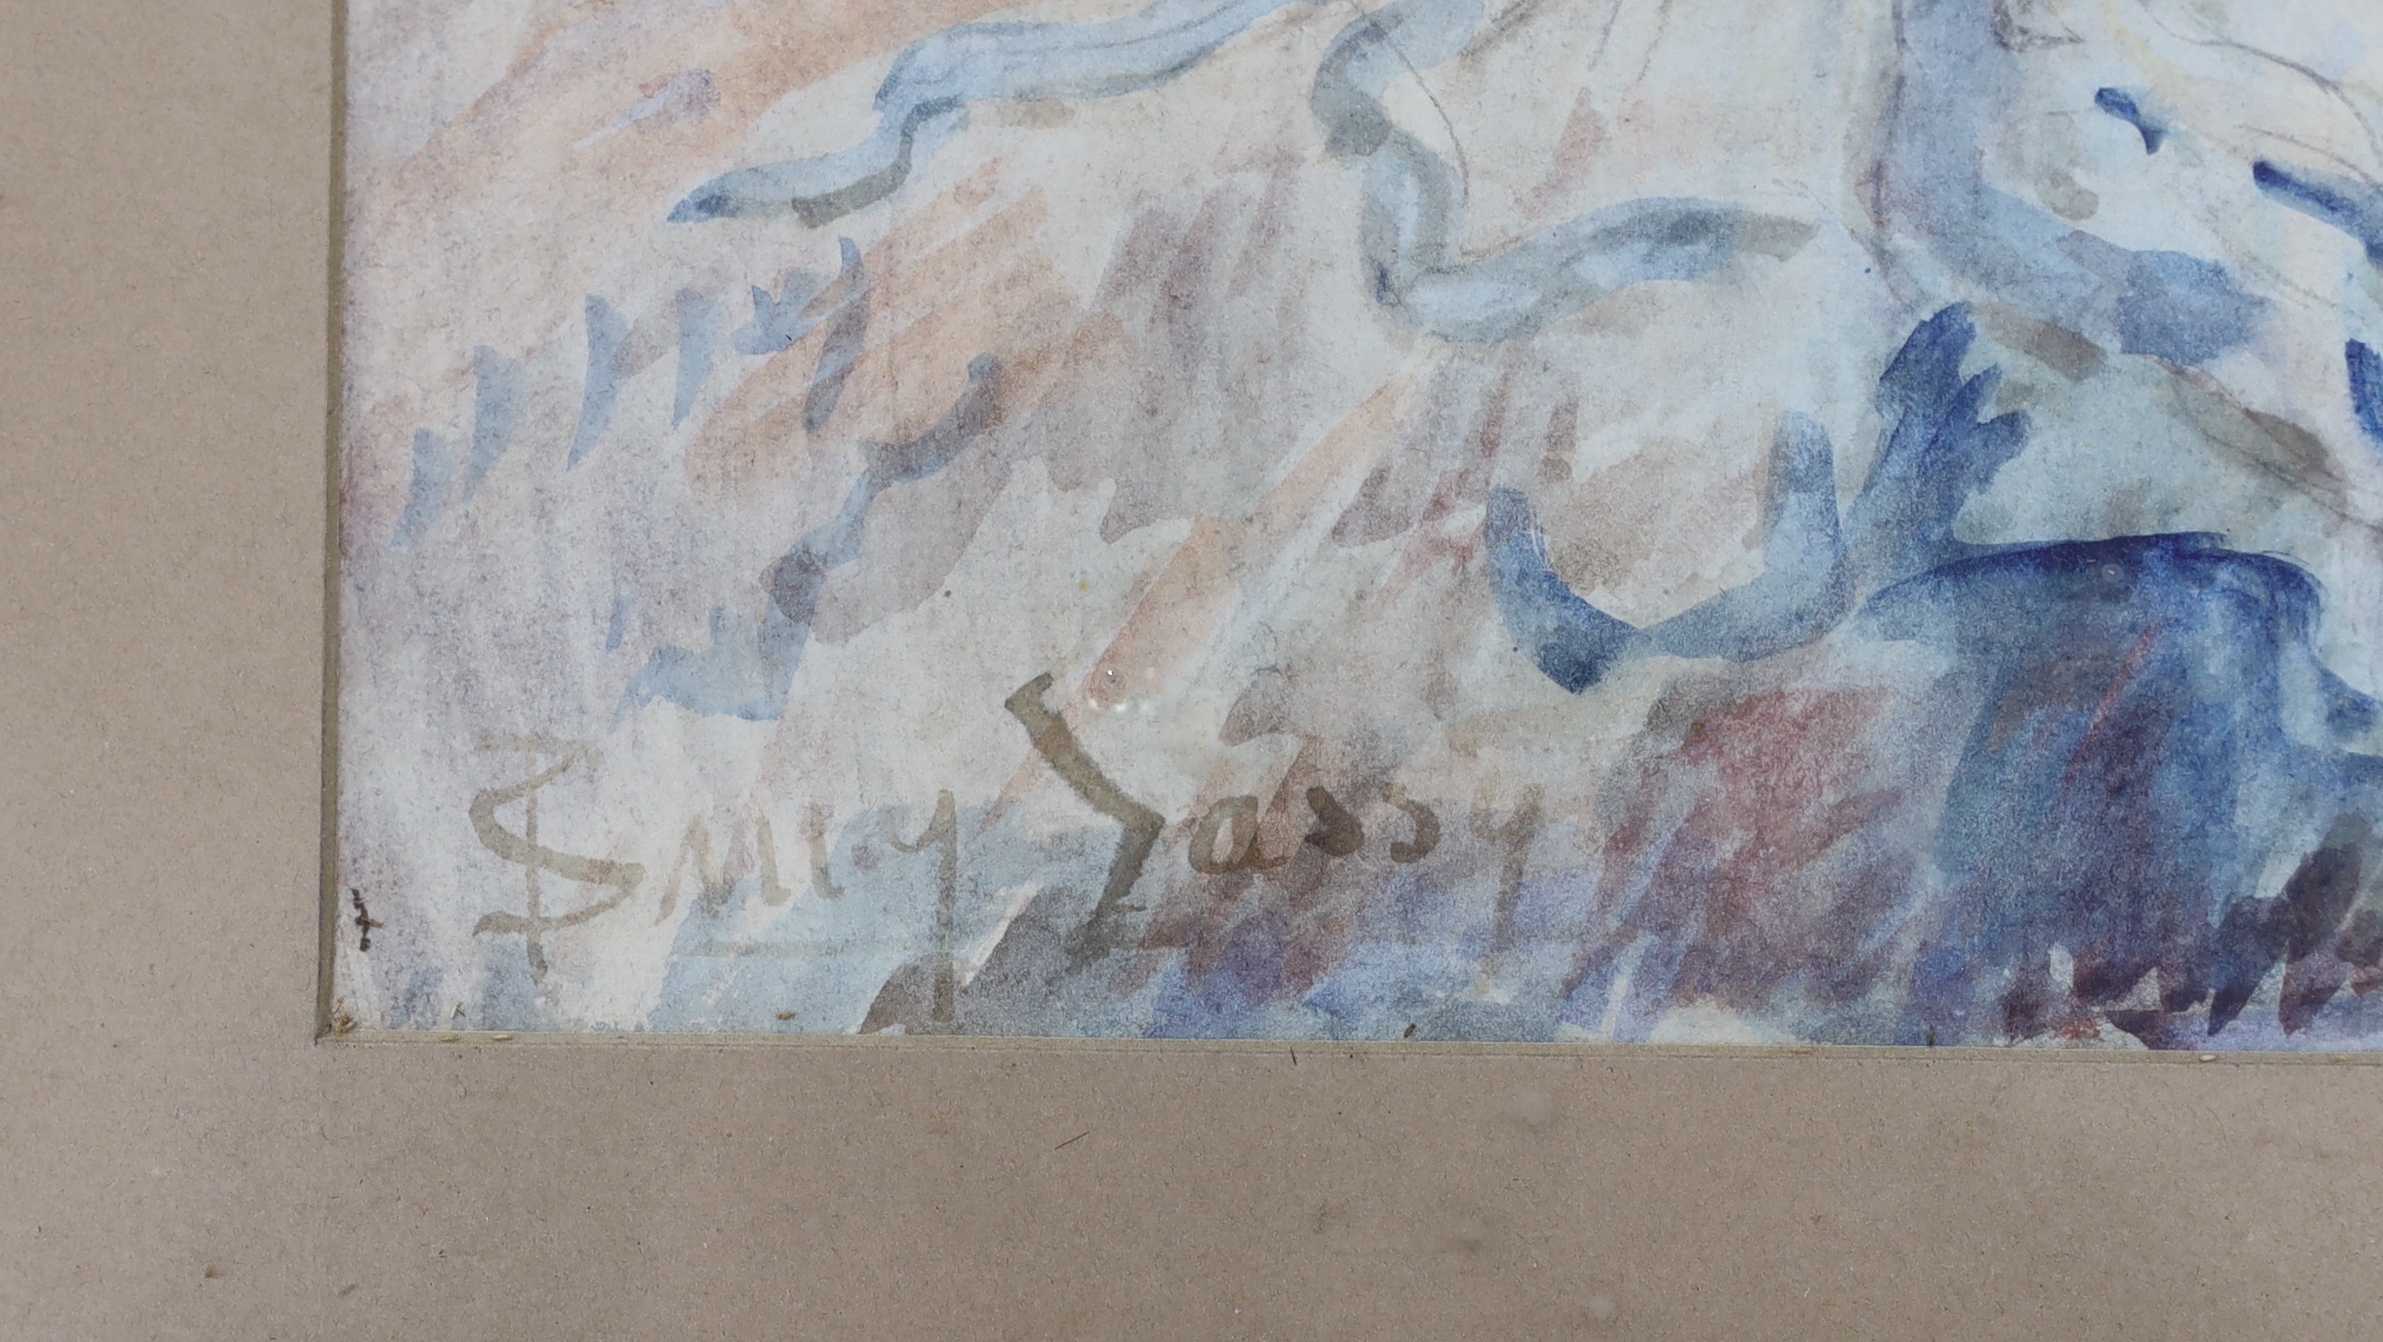 Stany Sassy (French, 20th. C) watercolour, 'Les Pins', signed, details verso, 43 x 40cm